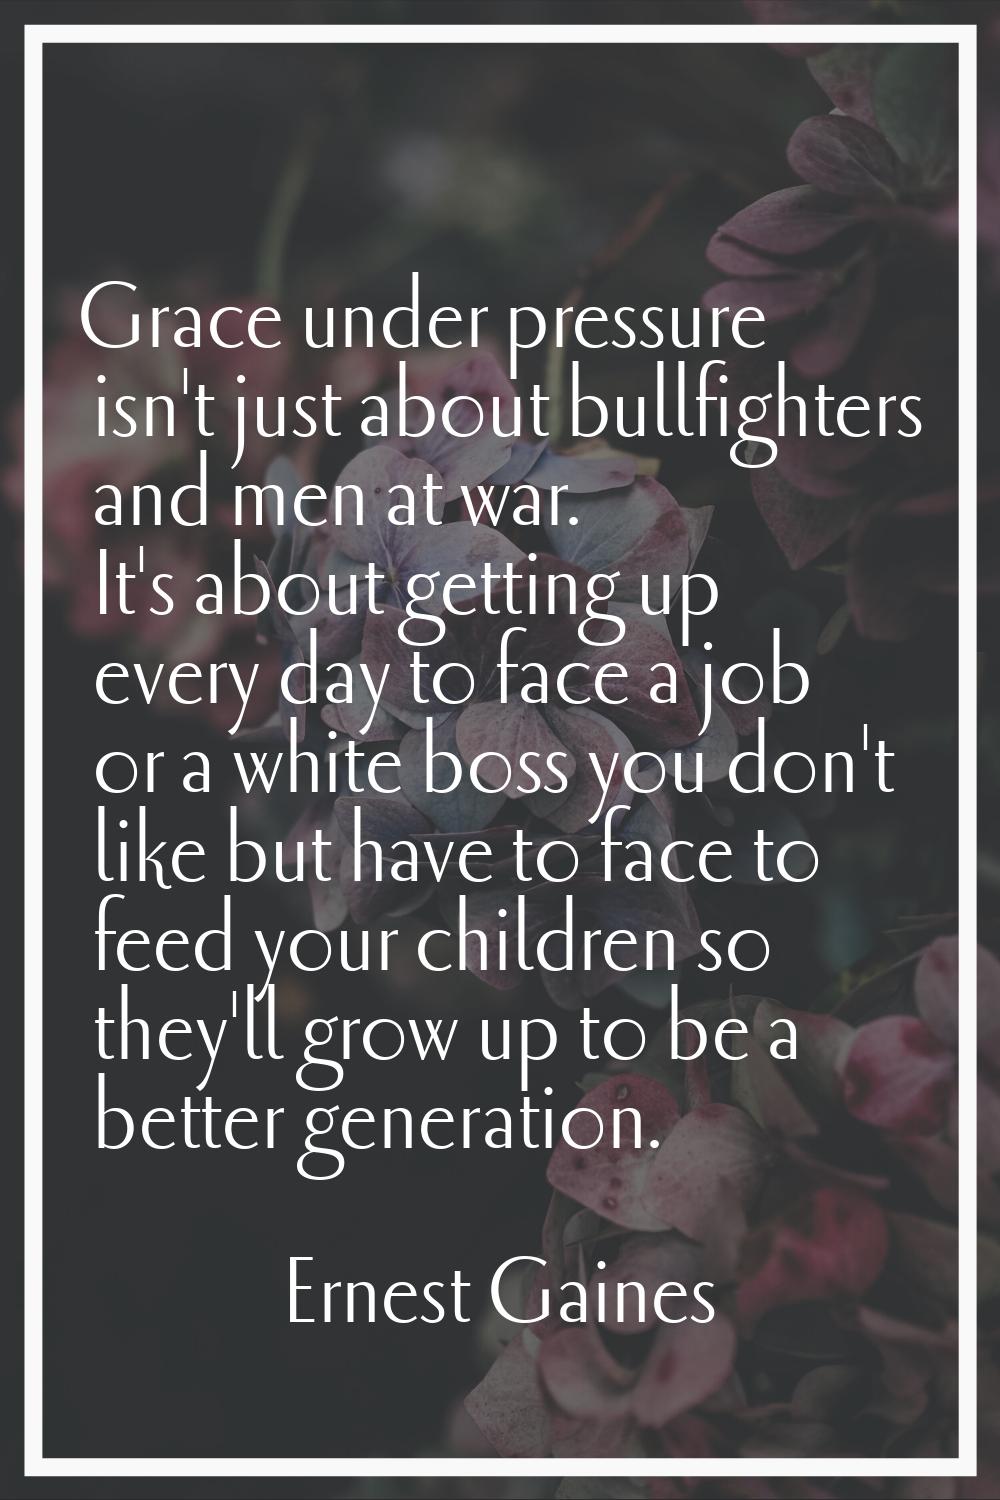 Grace under pressure isn't just about bullfighters and men at war. It's about getting up every day 